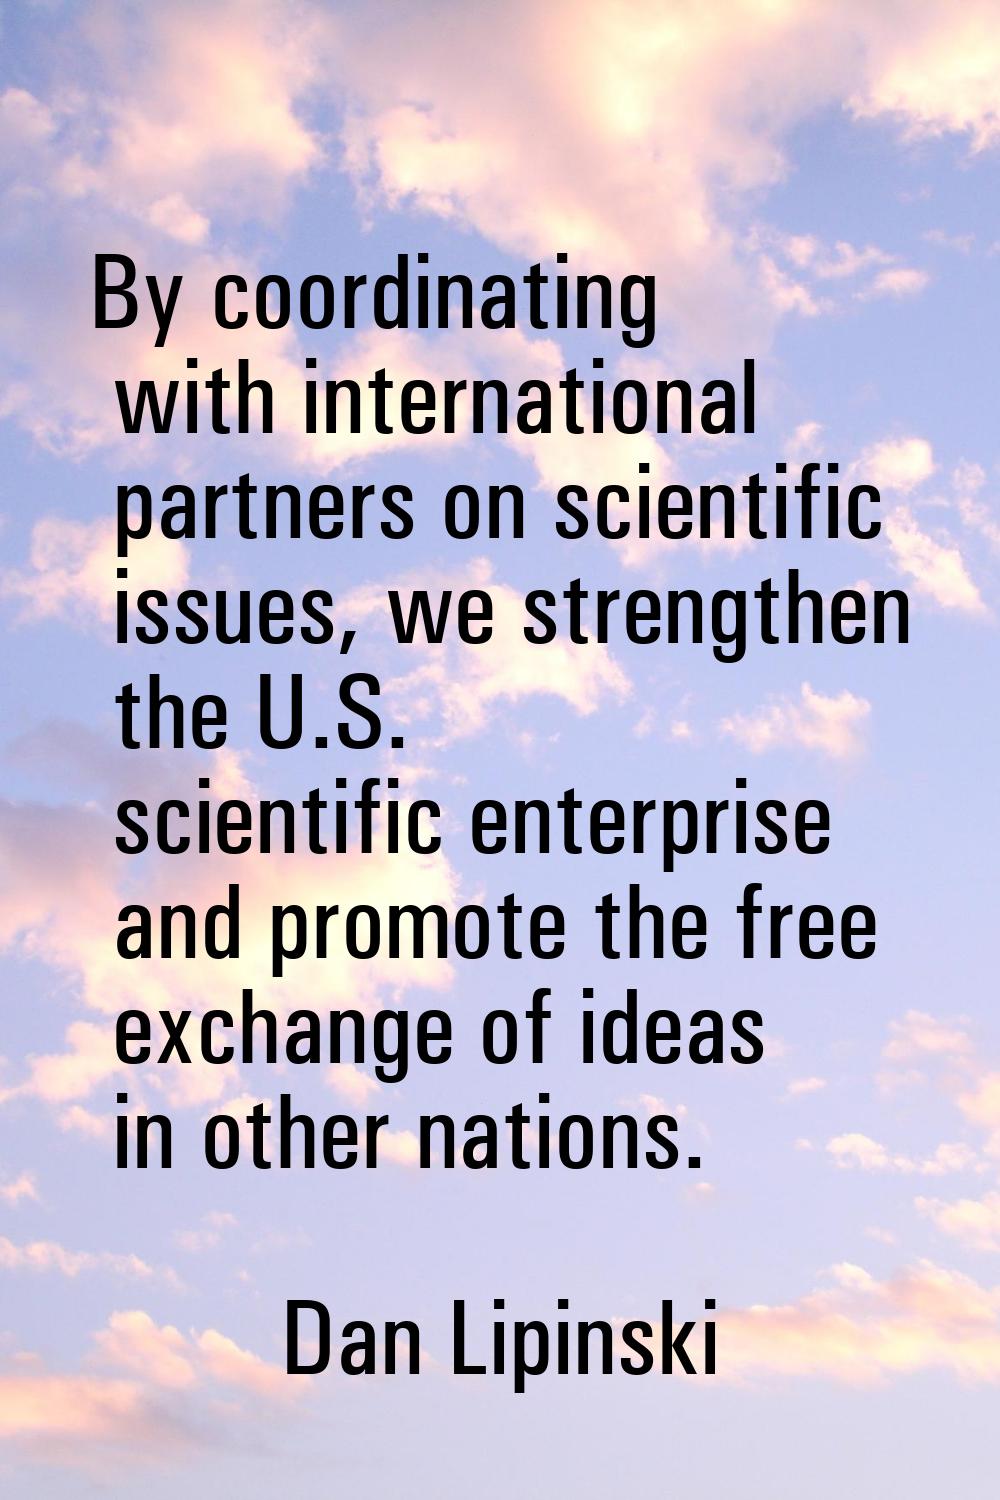 By coordinating with international partners on scientific issues, we strengthen the U.S. scientific